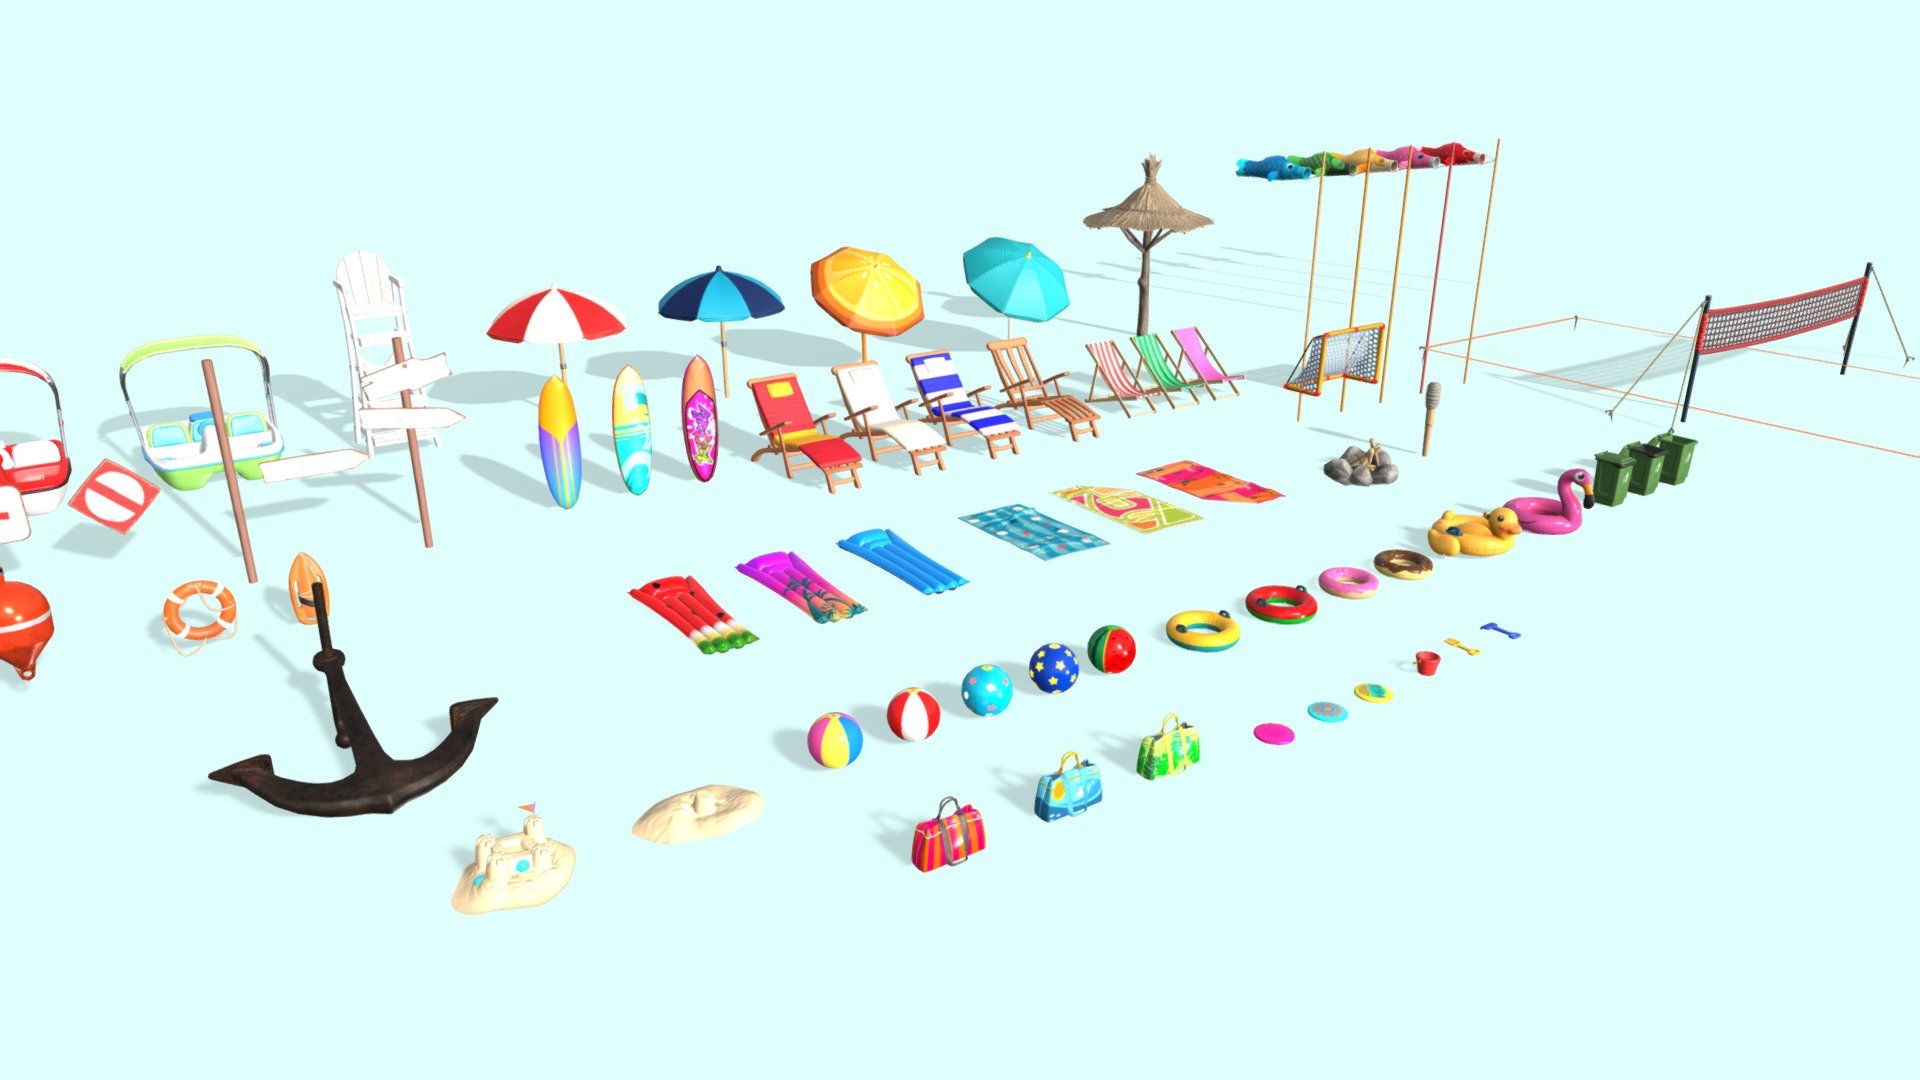 Environment and buildings from the KEKOS Tropical Beach package.

Ready to import in your preferred videogame engine or 3D software.

MODELS INCLUDED (with color variations):

Duck floater, Flamingo floater, 2 Classic floaters, 2 Donut floaters, 4 Parasols, 3 Surfboards, Straw parasol, Bucket, Shovel and Rake, 3 Towels, Volleynet, Soccer goal, 3 Pedal boats, 3 Pool mat, 3 Beach bags, 5 Beachballs, 3 Chairs, 3 Deckchairs, 5 Fish kites, 3 Frisbees, 2 Buoys, Lifesaver classic, Lifesaver rescue, Lifeguard chair, 2 Sandcastle, Anchor, Bonfire, 5 Signs and pole, Torch, Trashbin.

FORMAT:

FBX

POLYGON COUNT:

MIN~400 triangles (for small assets) / MAX~6k triangles (for complex assets like pedal boat).

TEXTURES:

PBR Textures: Diffuse + Normal map + Metallic (R) / Smoothness (A) / Ambient Oclussion (G) + Emissive (for some assets)

Size: 2048x2048 or 1024x1024

PNG format - KEKOS Tropical Beach - Props - Buy Royalty Free 3D model by Mameshiba Games (@MameshibaGames) 3d model